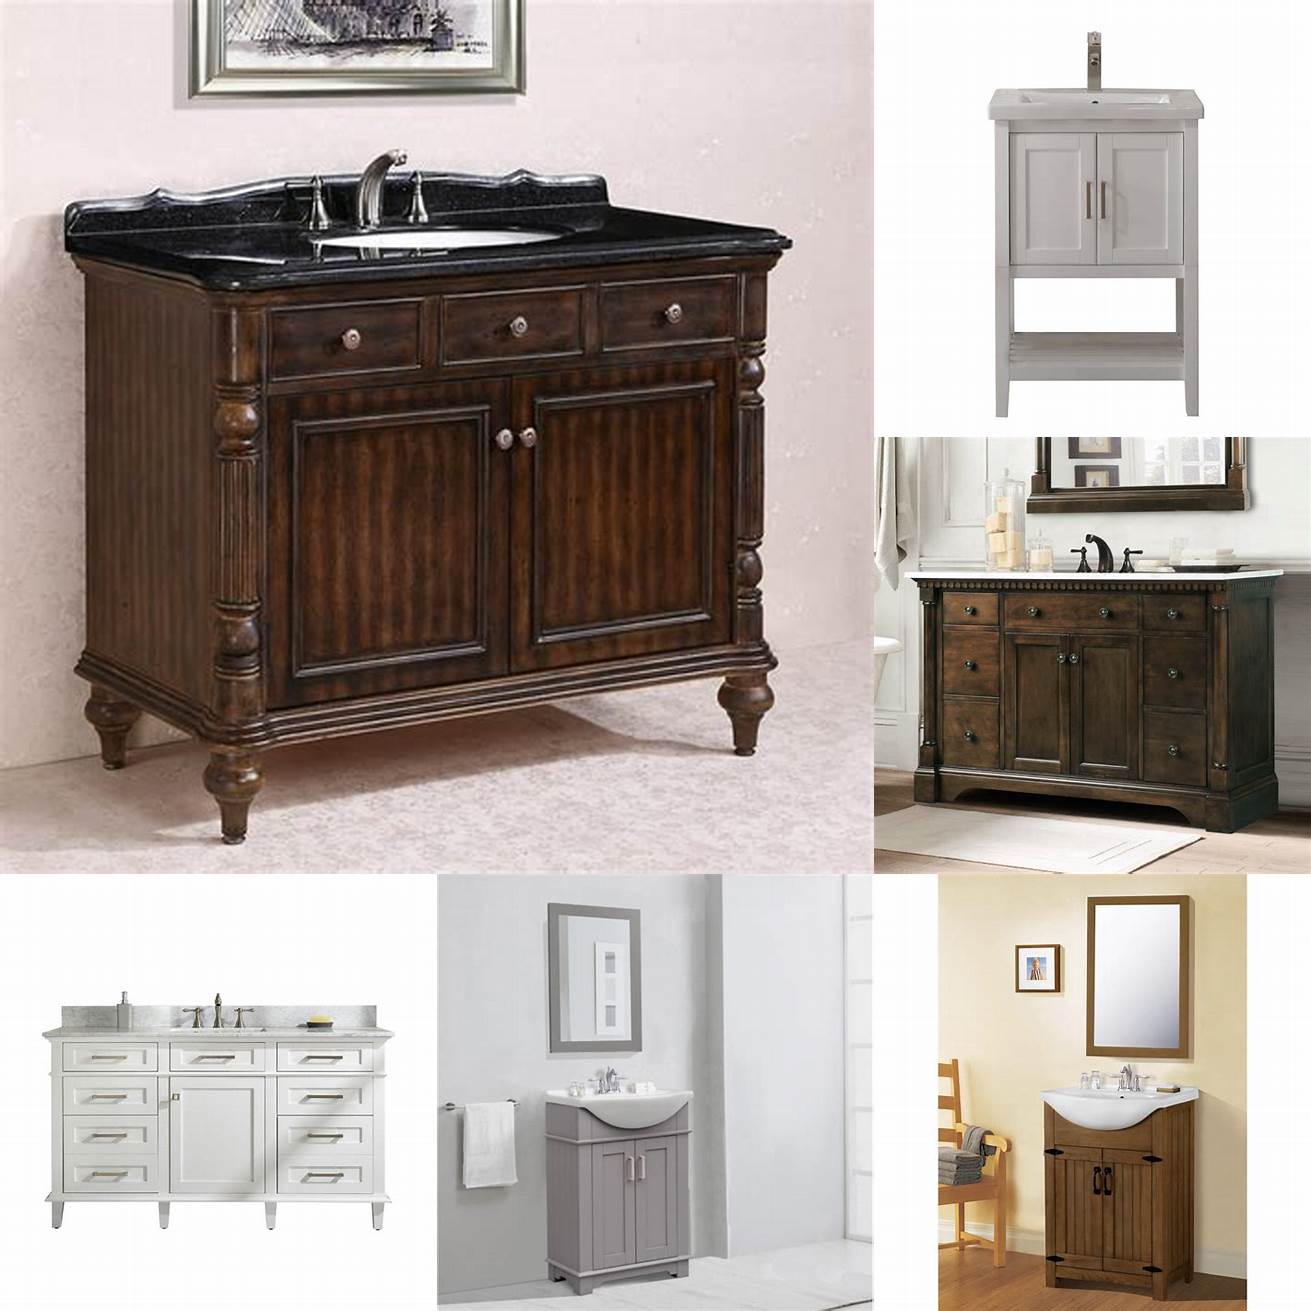 Legion Furniture Bathroom Vanity comes in various finishes including white